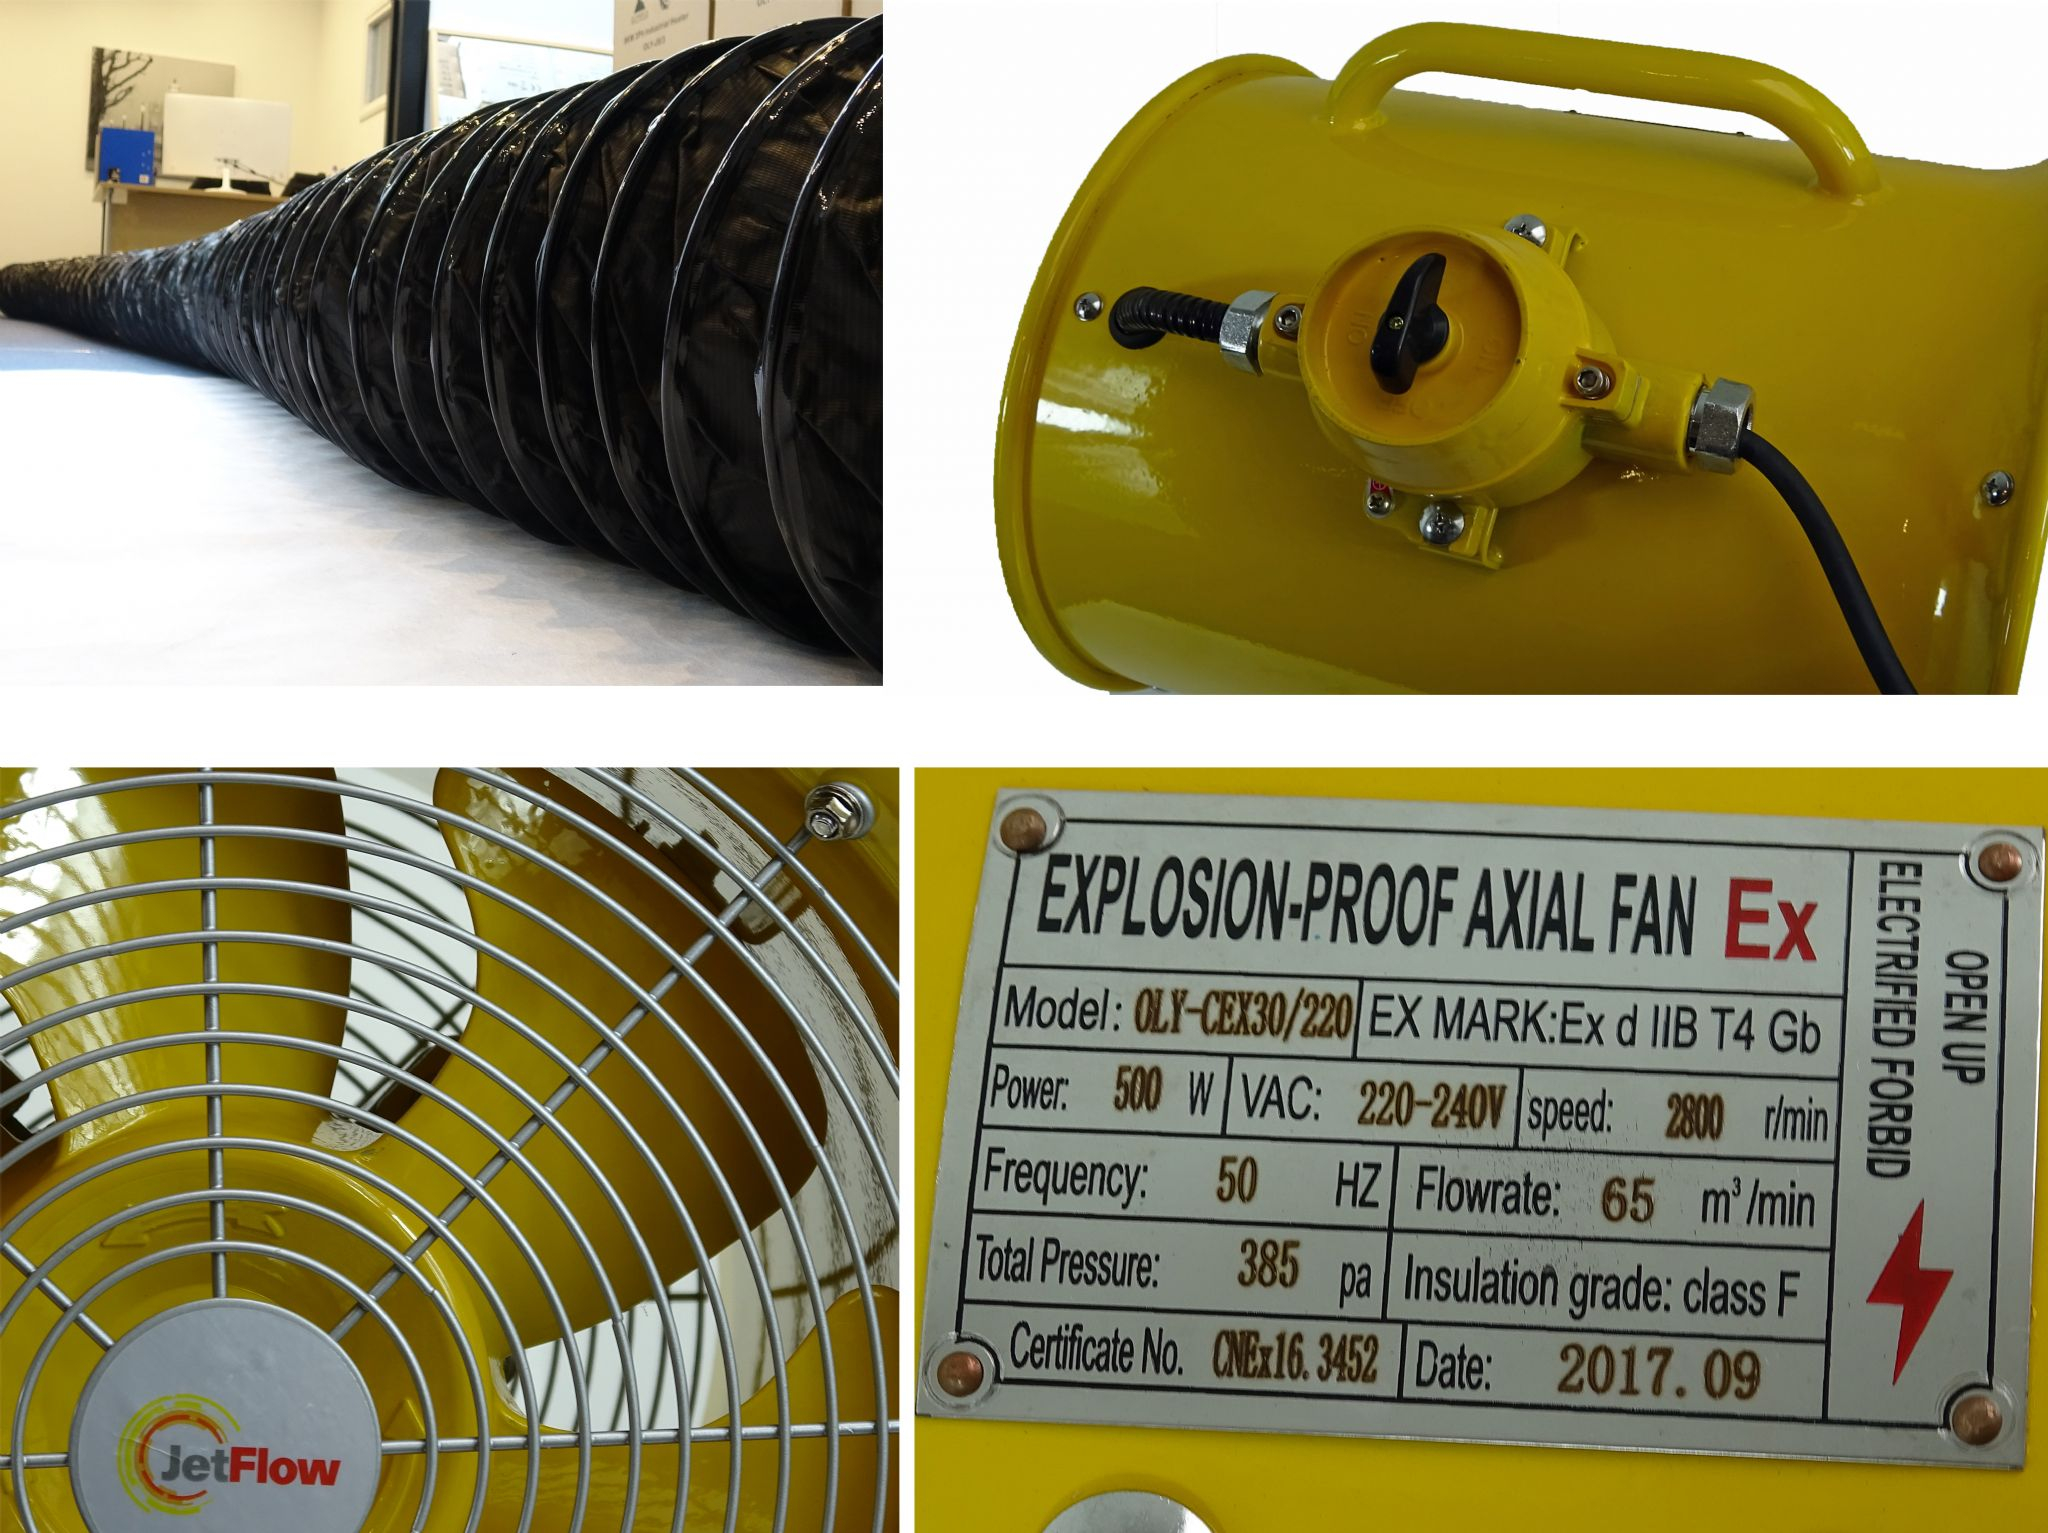 Olympus Jetflow Oly Cex30220 Explosion Proof Dust And Fume Extractor Ventilator Fan 300mm 240v50hz intended for measurements 2048 X 1533